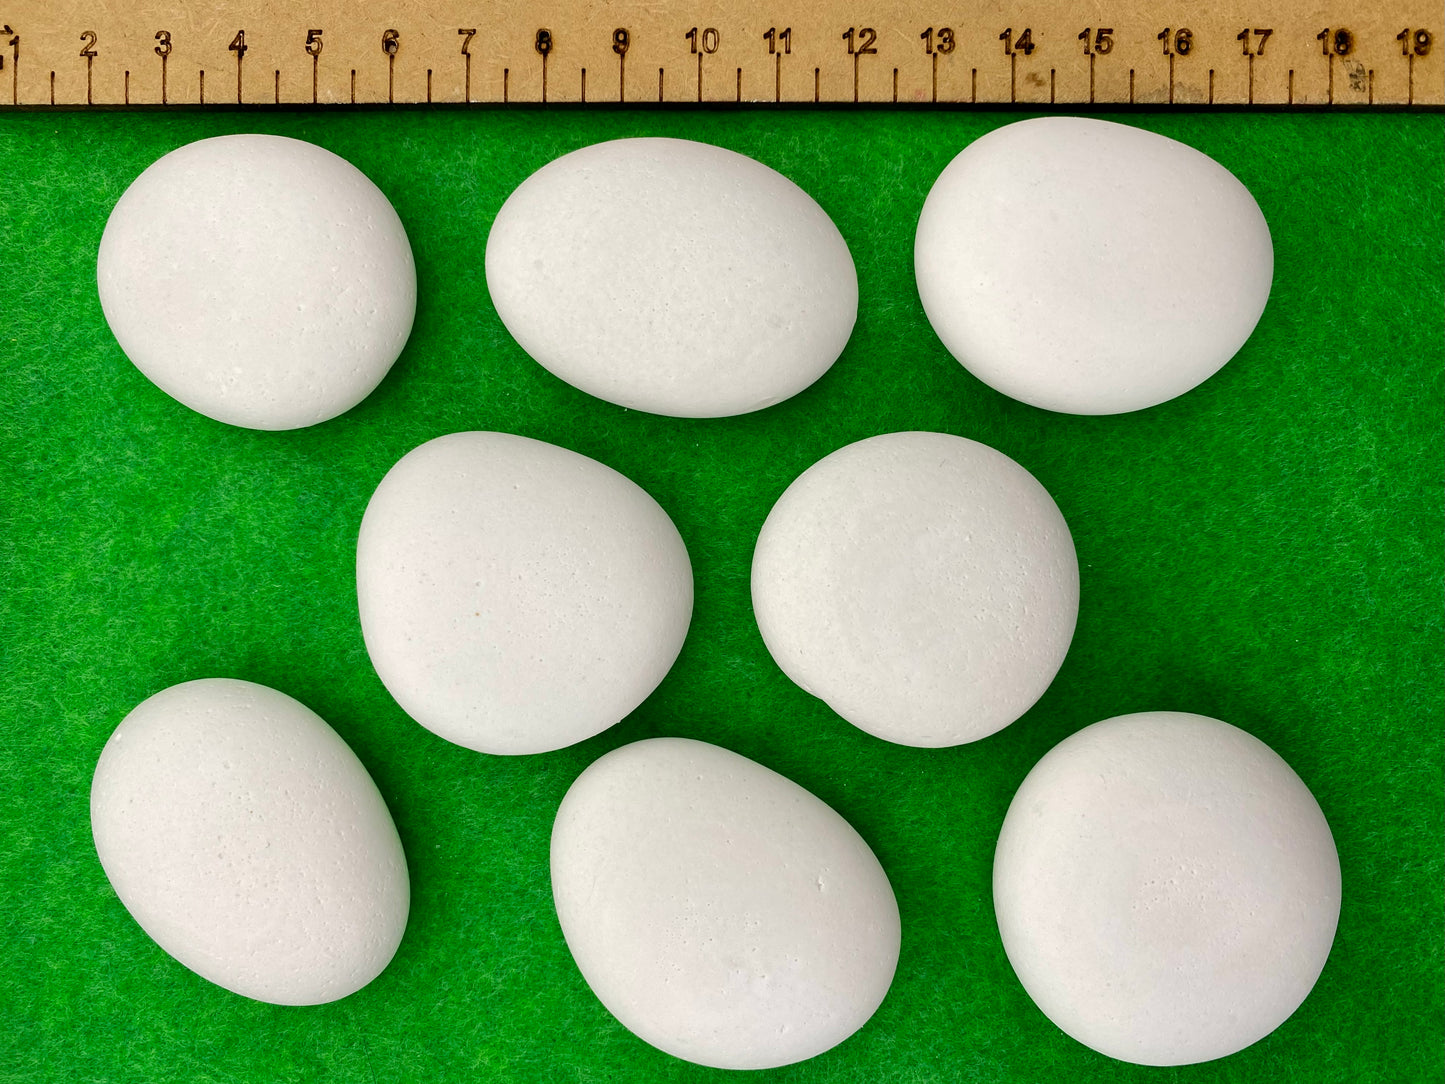 8 small white plaster pebbles of different shapes and sizes next to a ruler